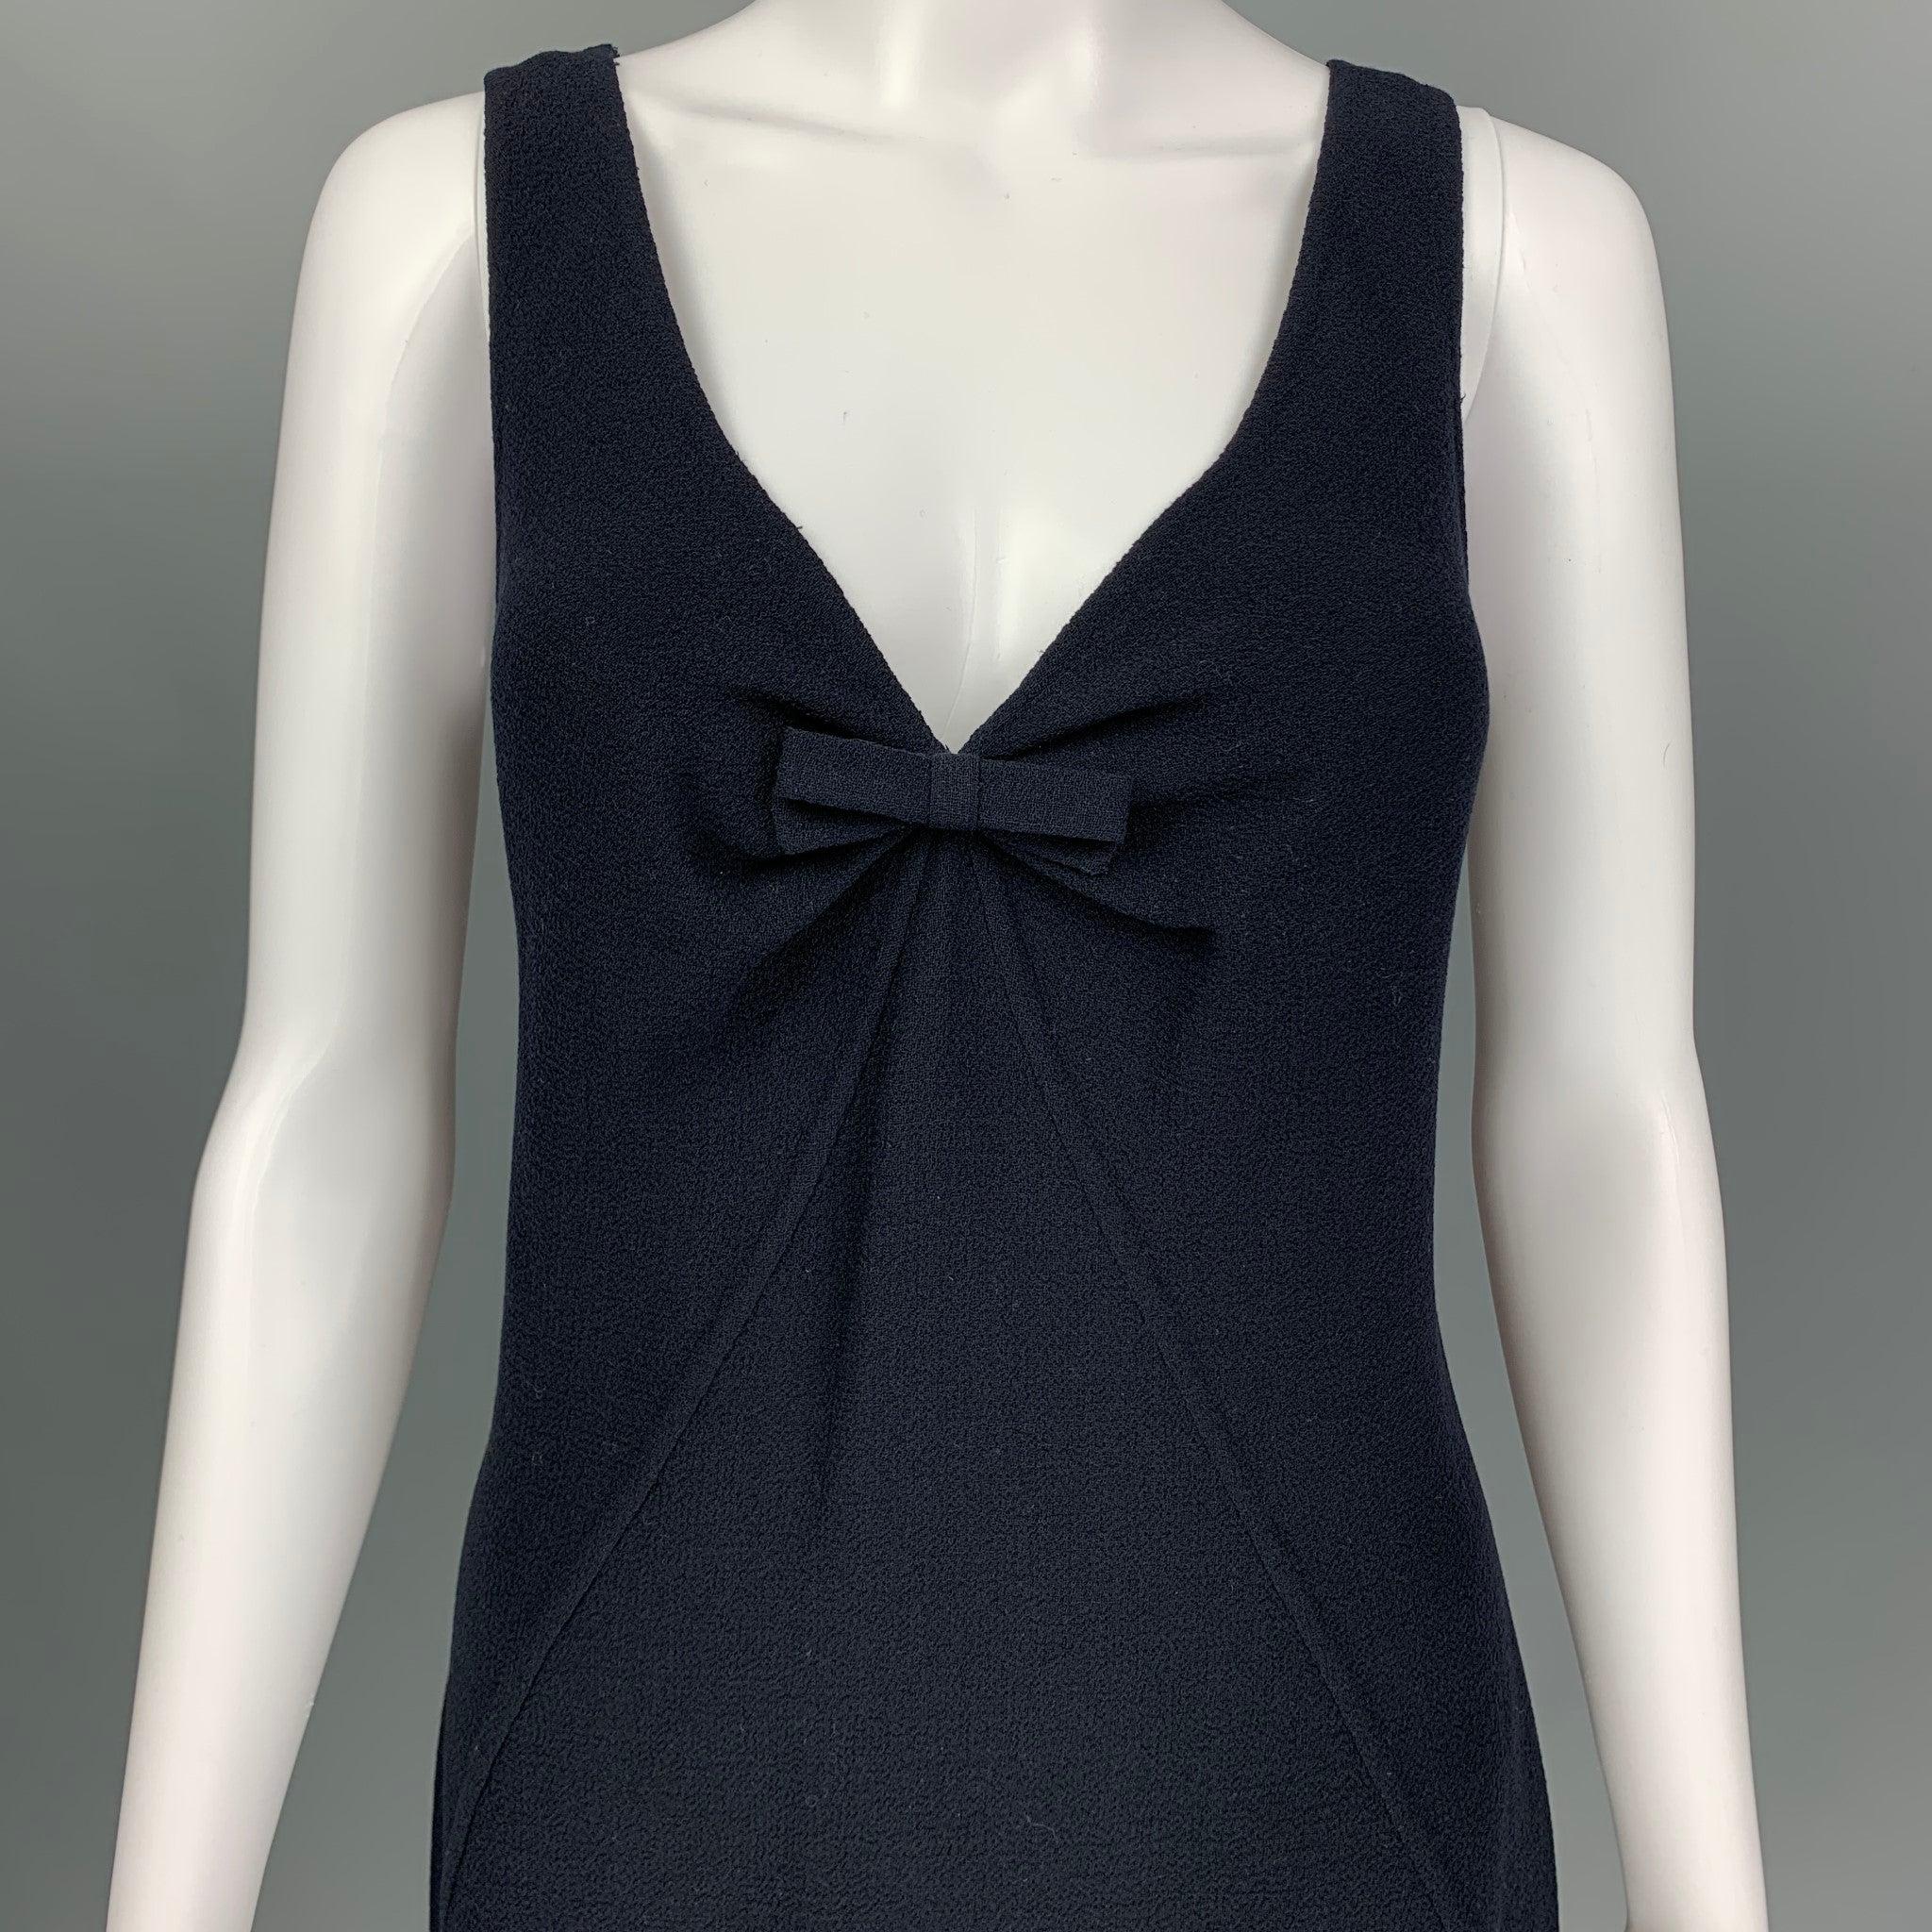 OSCAR DE LA RENTA for Saks Fifth Avenue Resort 2007 cocktail dress comes in a navy wool featuring a bow detail at center front, v-neck, sleeveless, center back invisible zip-up closure. Made in Italy. Excellent Pre-Owned Condition. 

Marked:   8